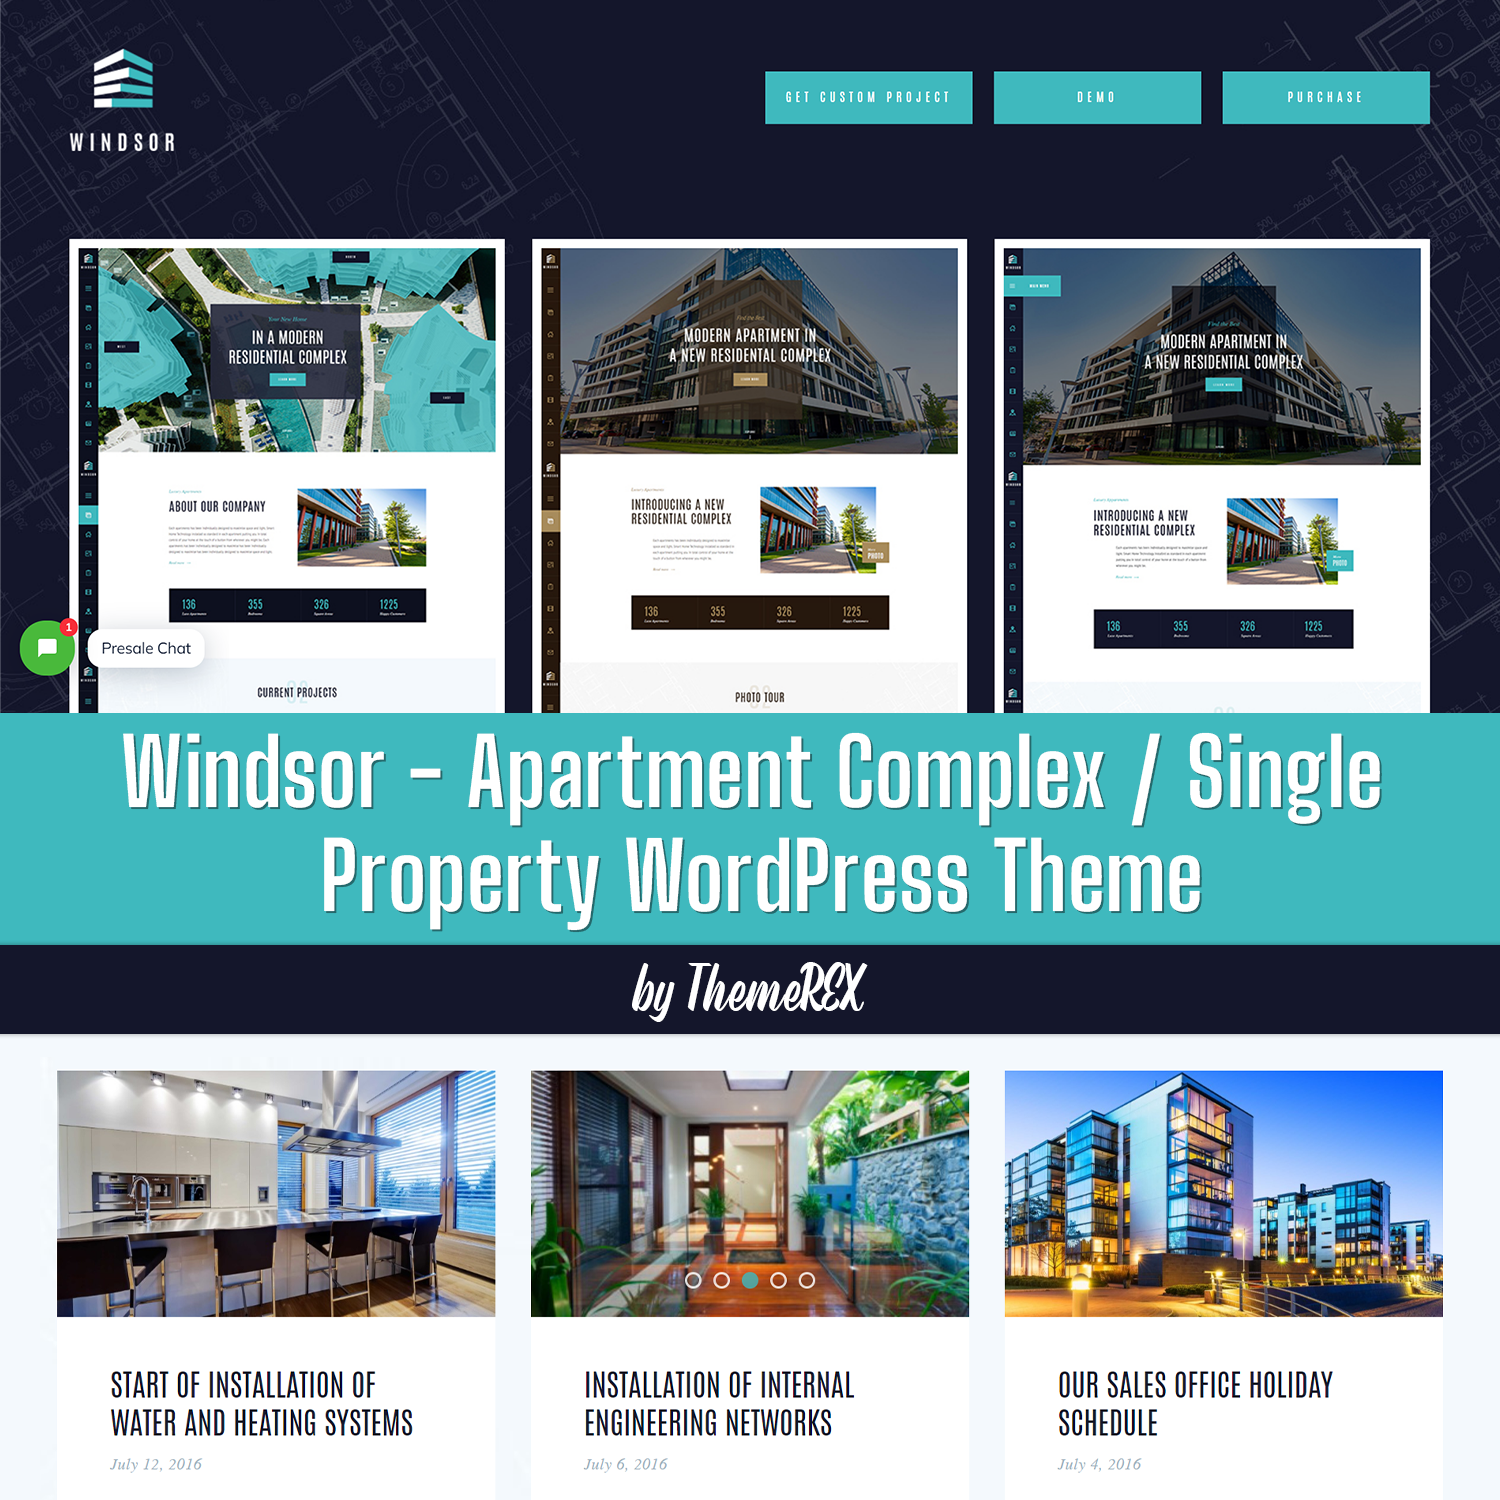 Images with windsor apartment complex single property wordpress theme.